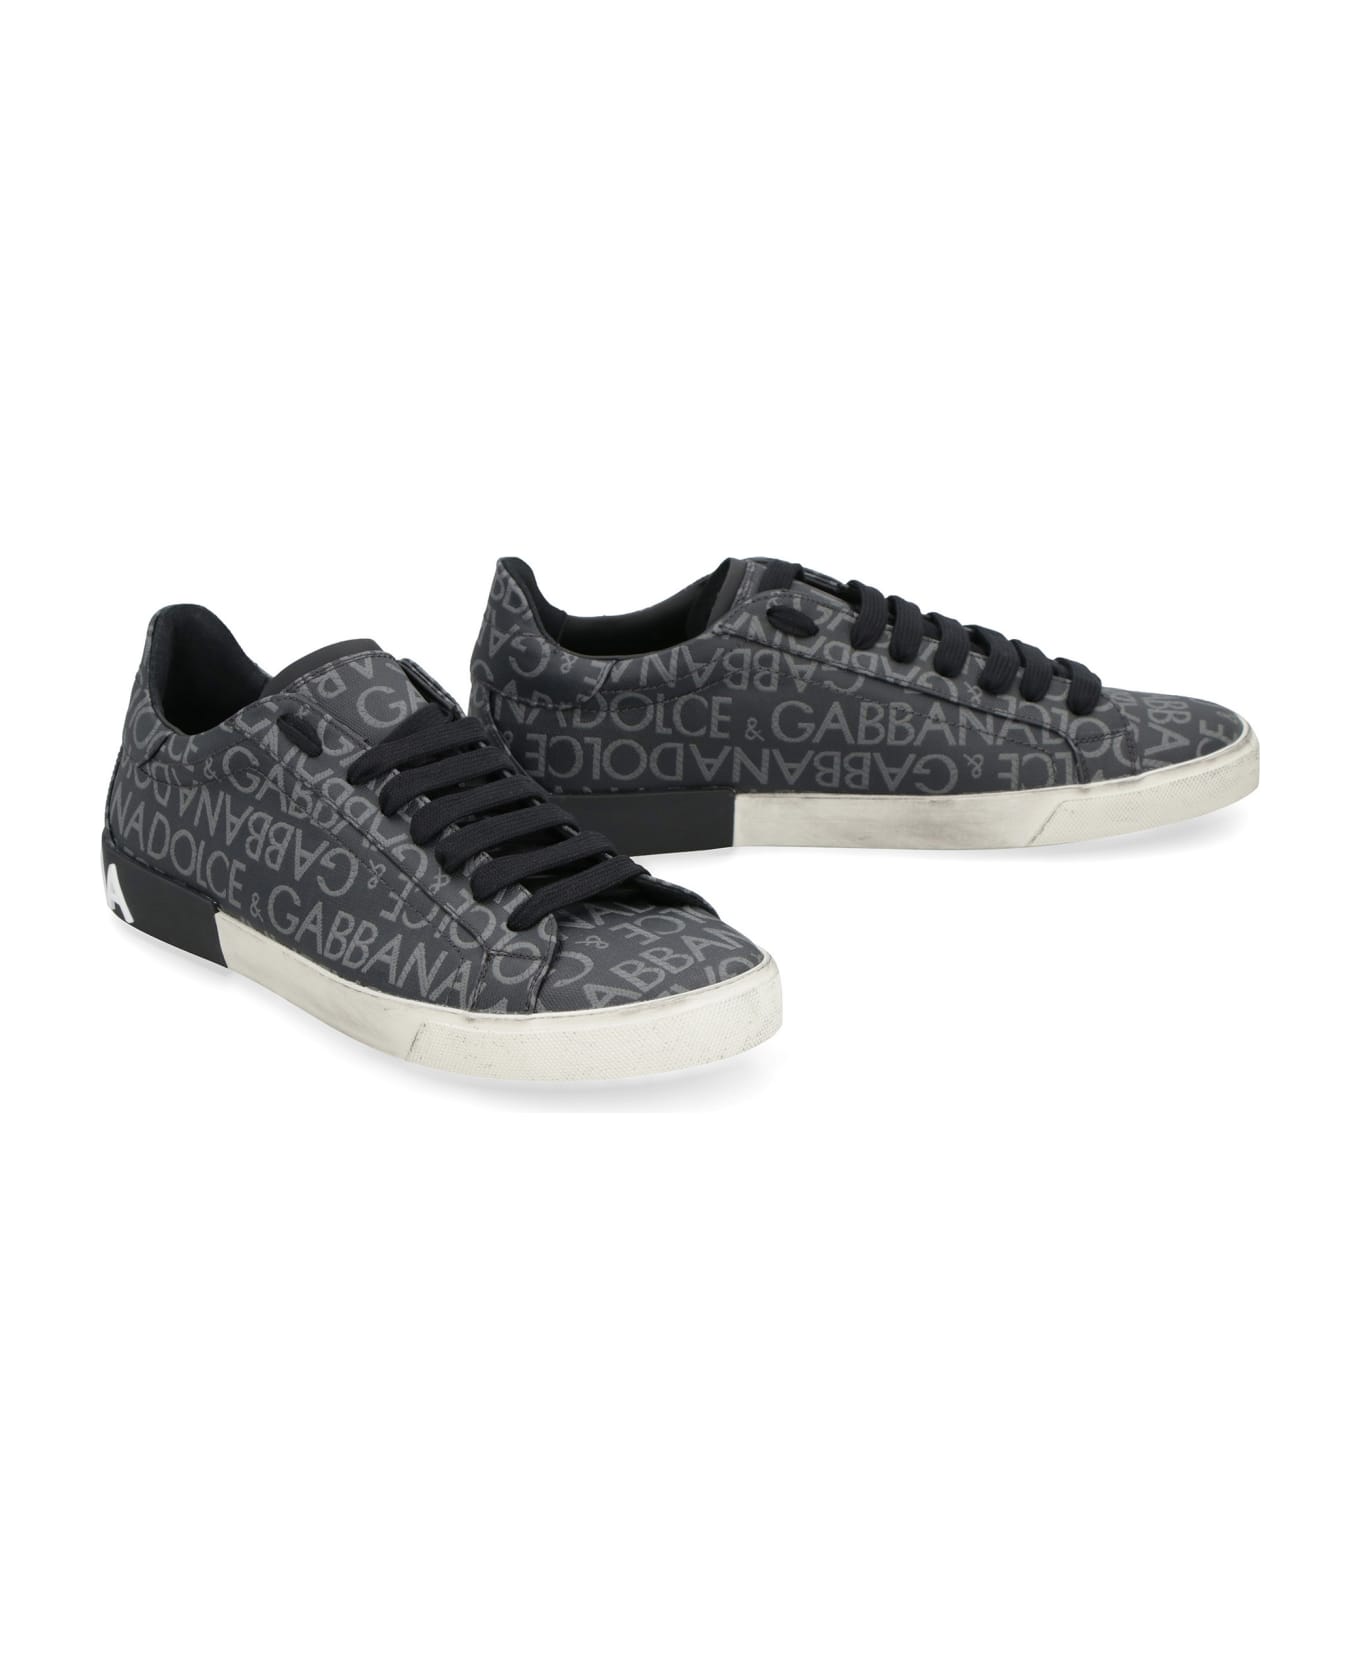 Dolce & Gabbana Portofino Leather And Fabric Low-top Sneakers - black スニーカー